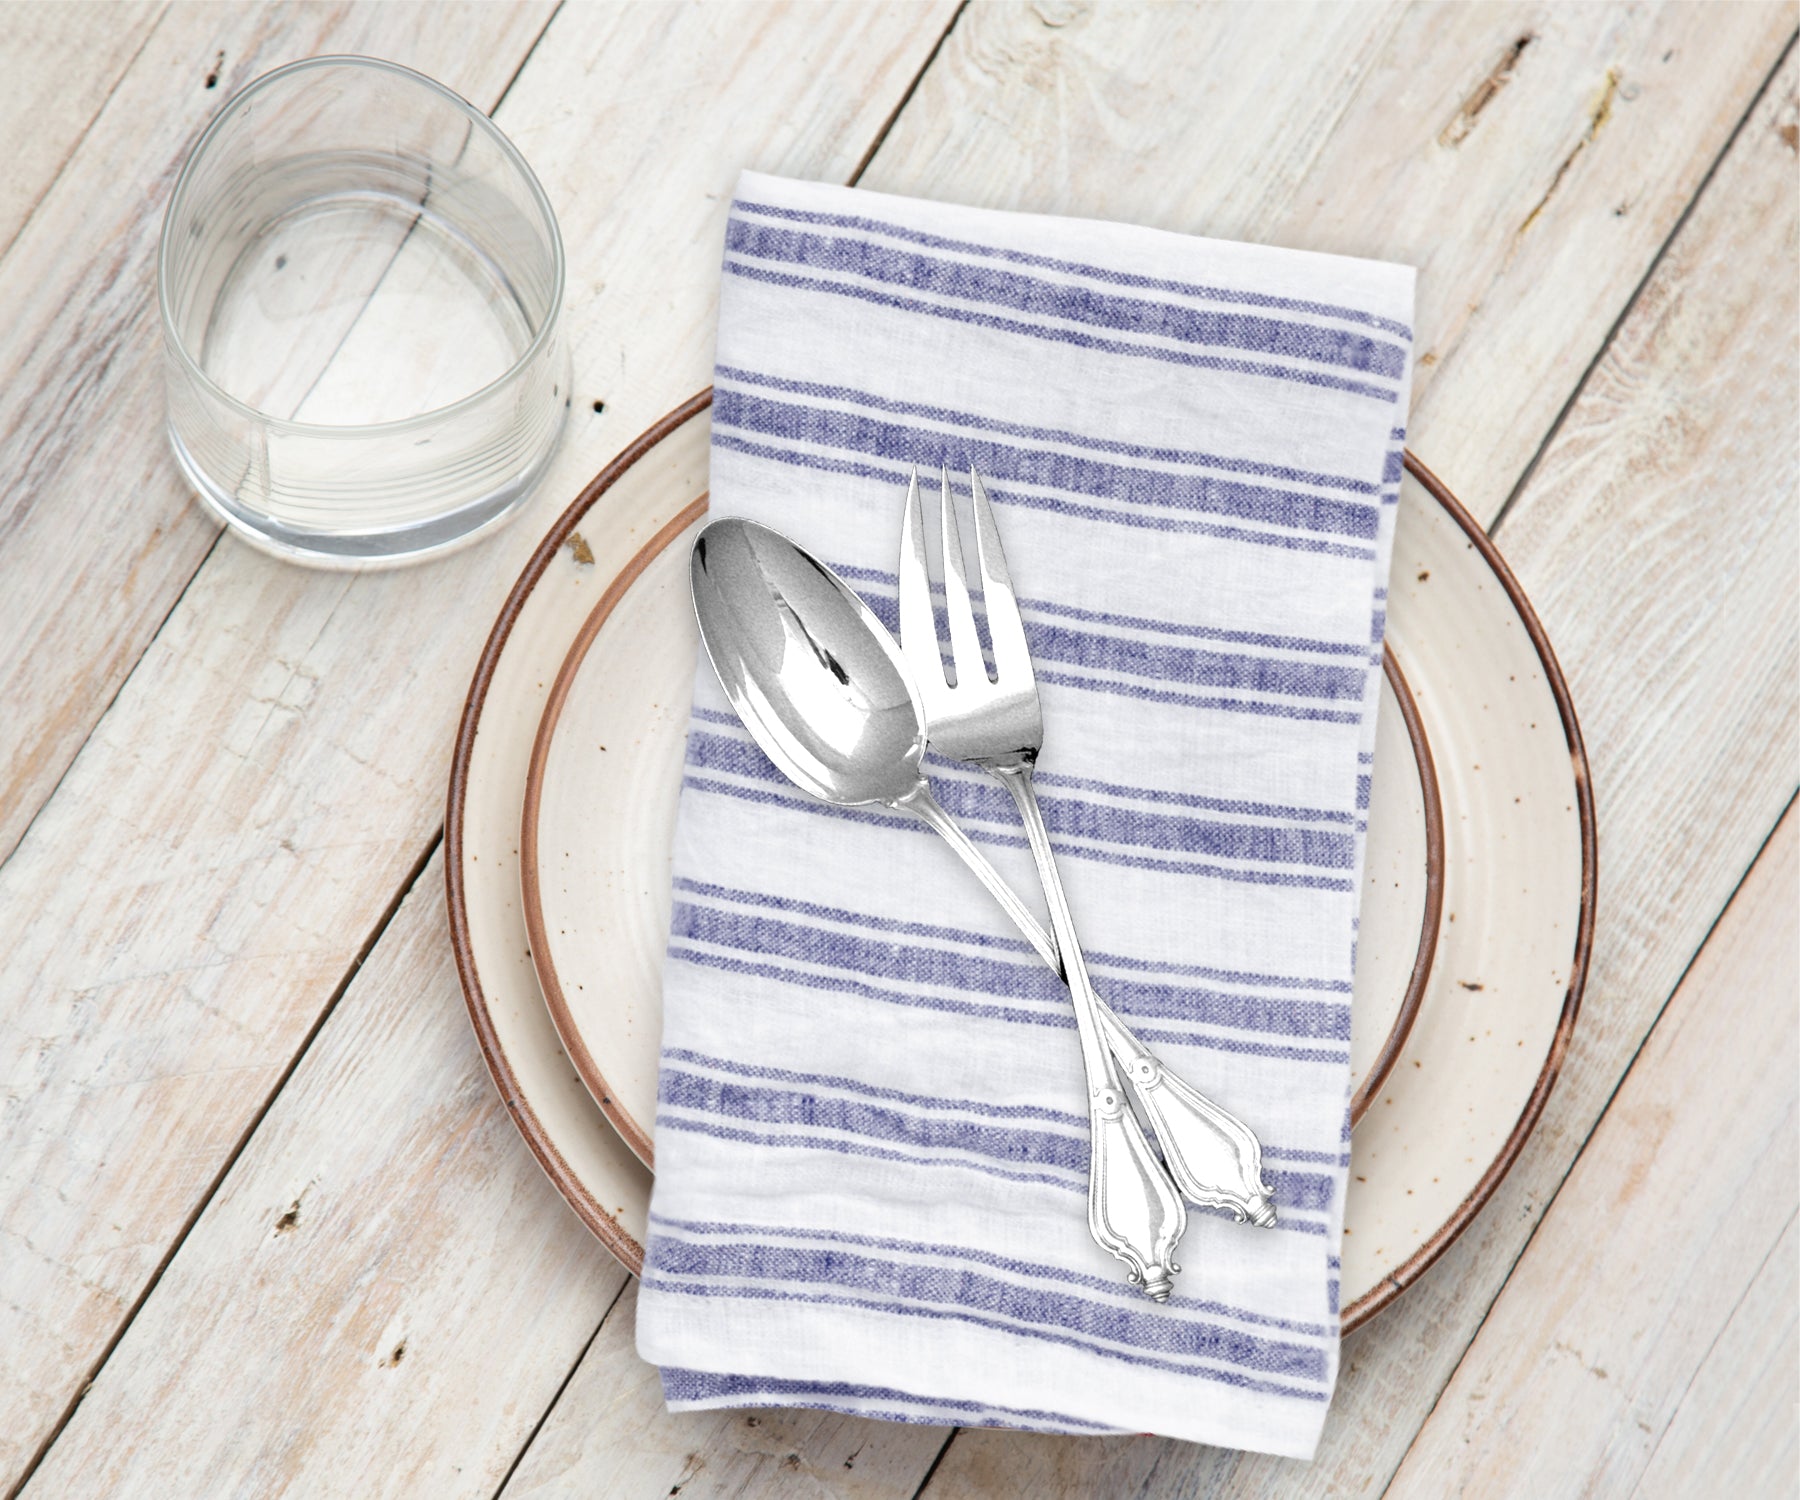 Royal Blue Napkins - Add a Pop of Regal Color to Your Dining Setting